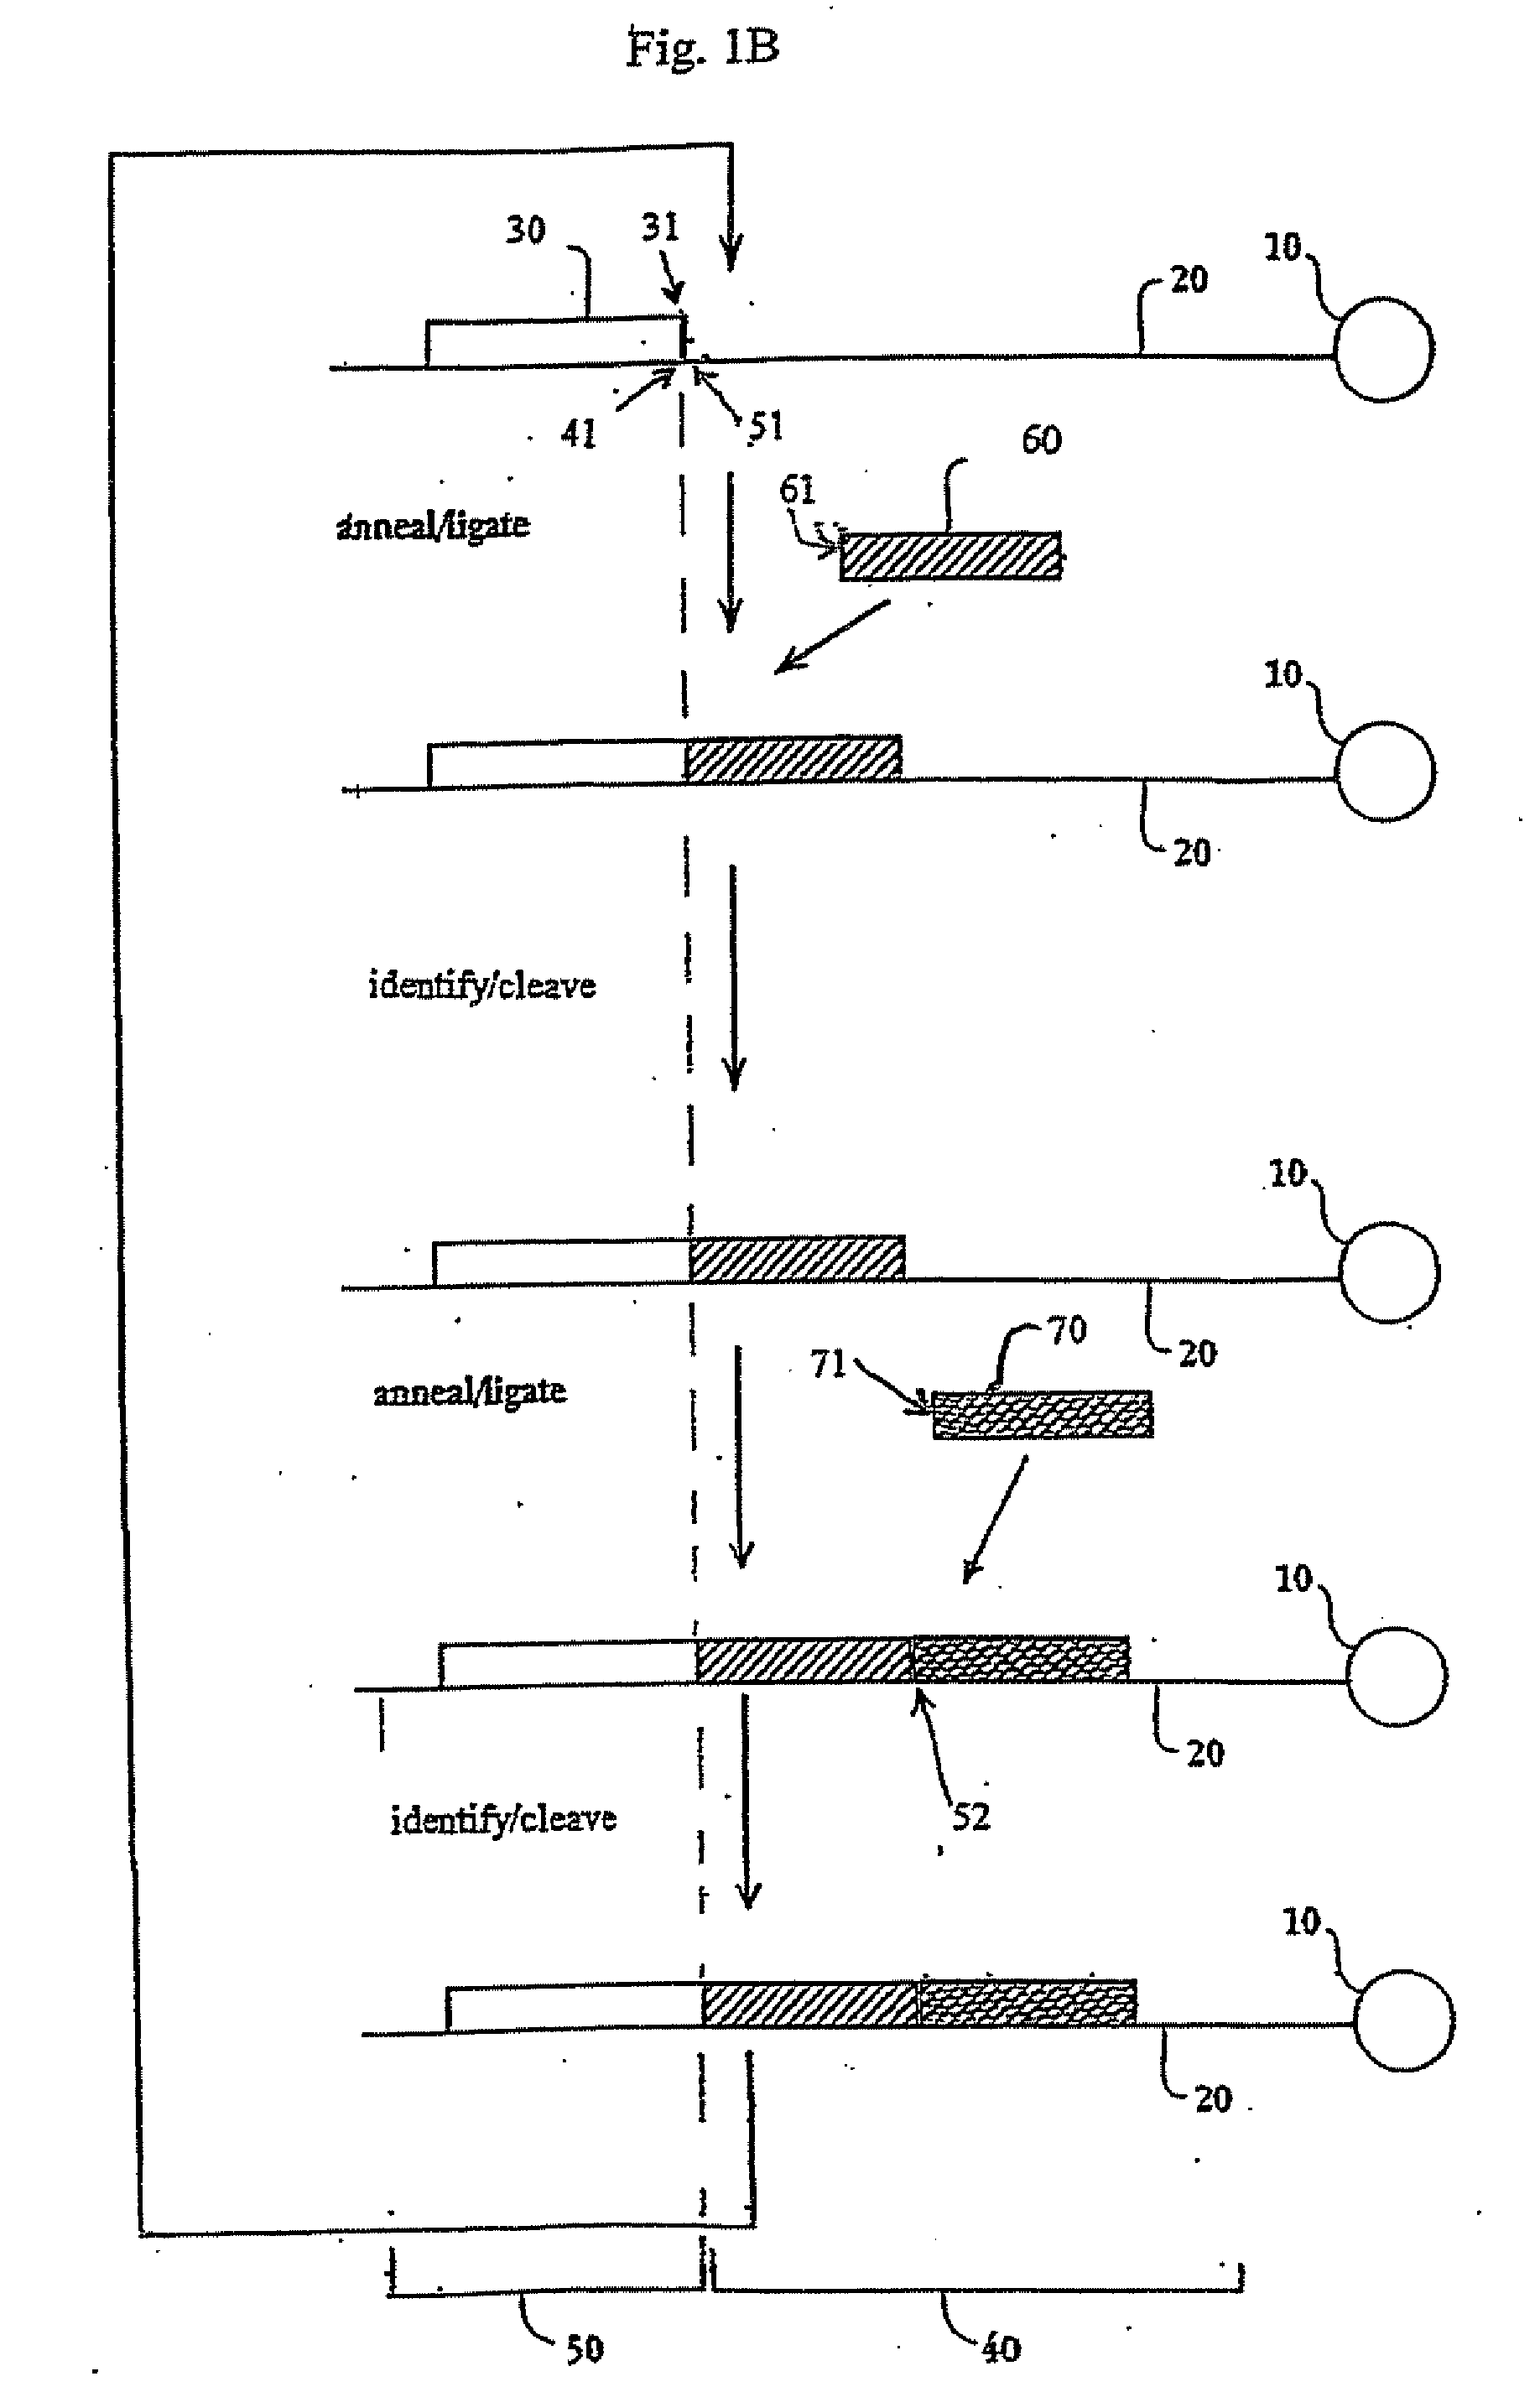 Reagents, methods, and libraries for gel-free bead-based sequencing